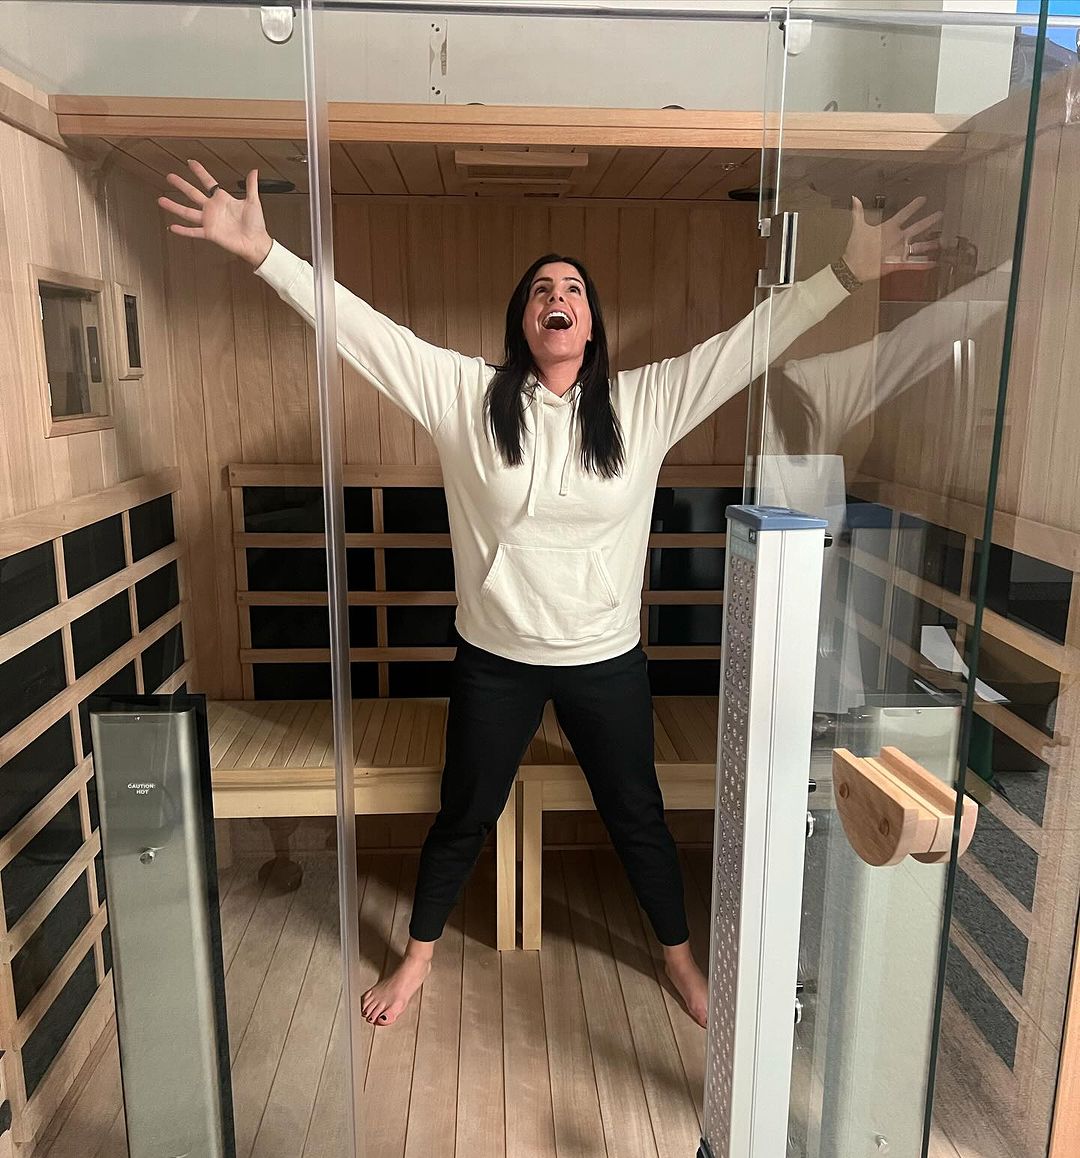 That new infrared sauna feeling... 📸 by faithmikitarealestate